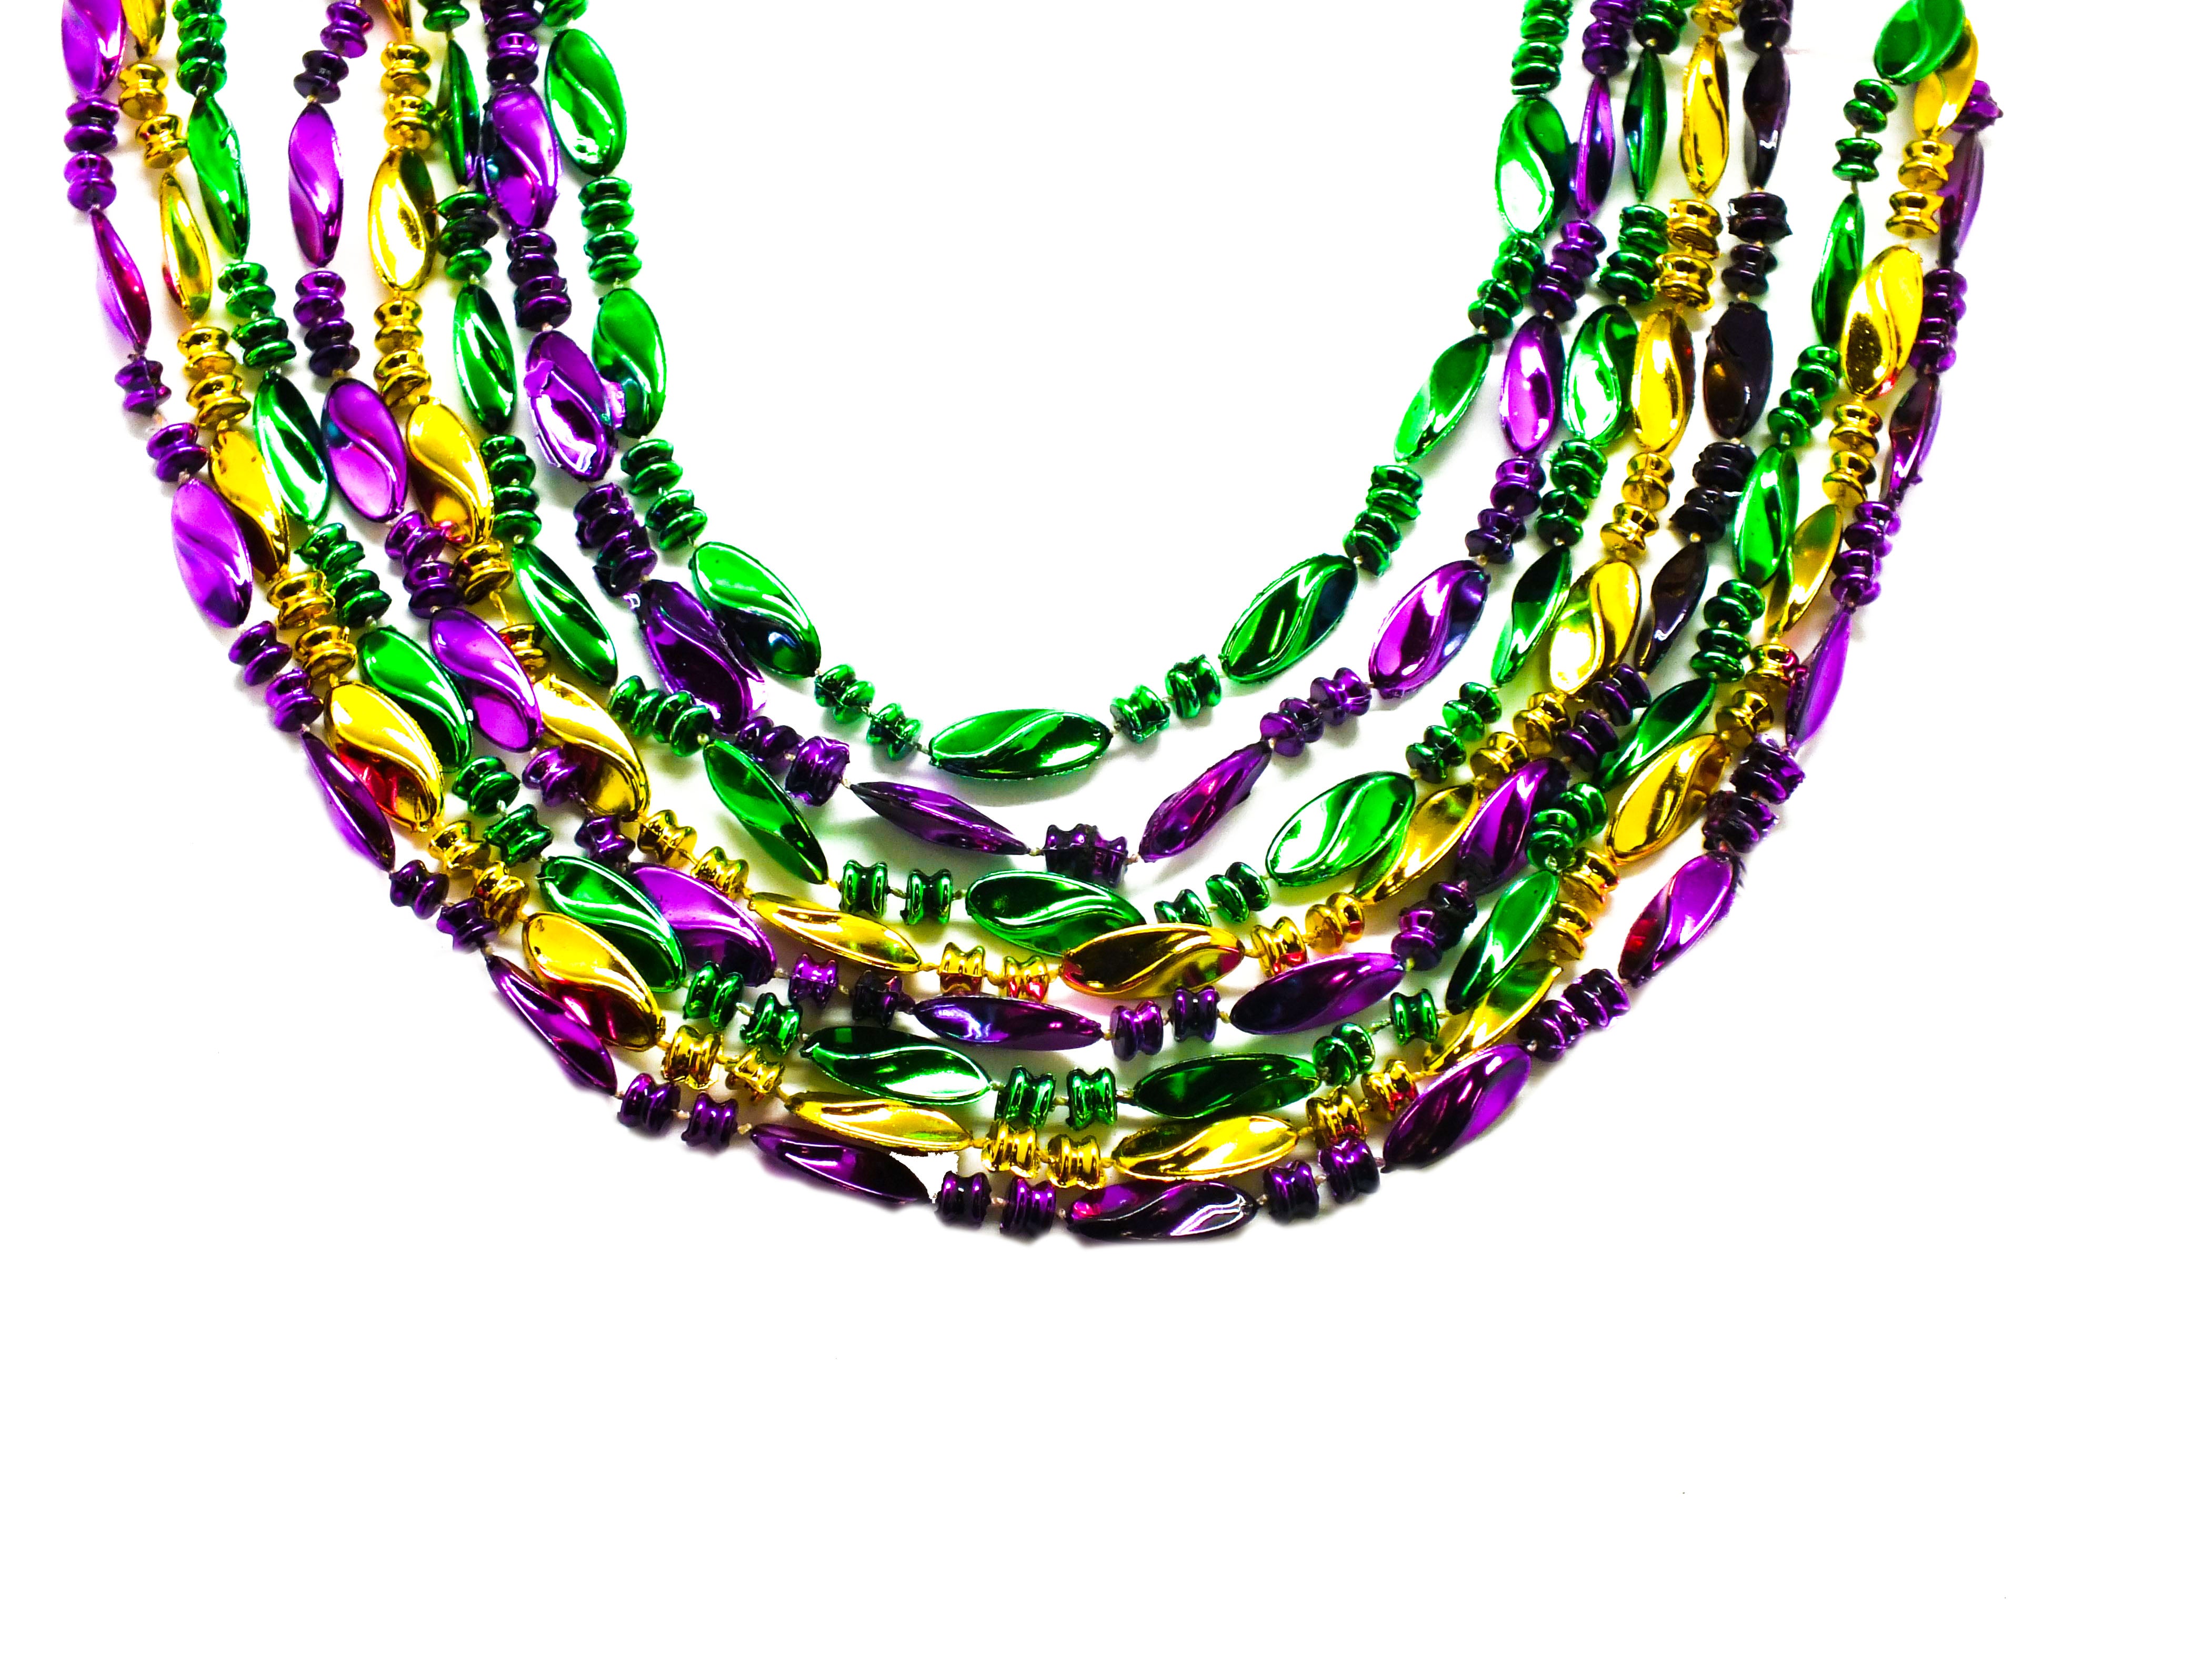 48" Twist Beads Purple, Green and Gold